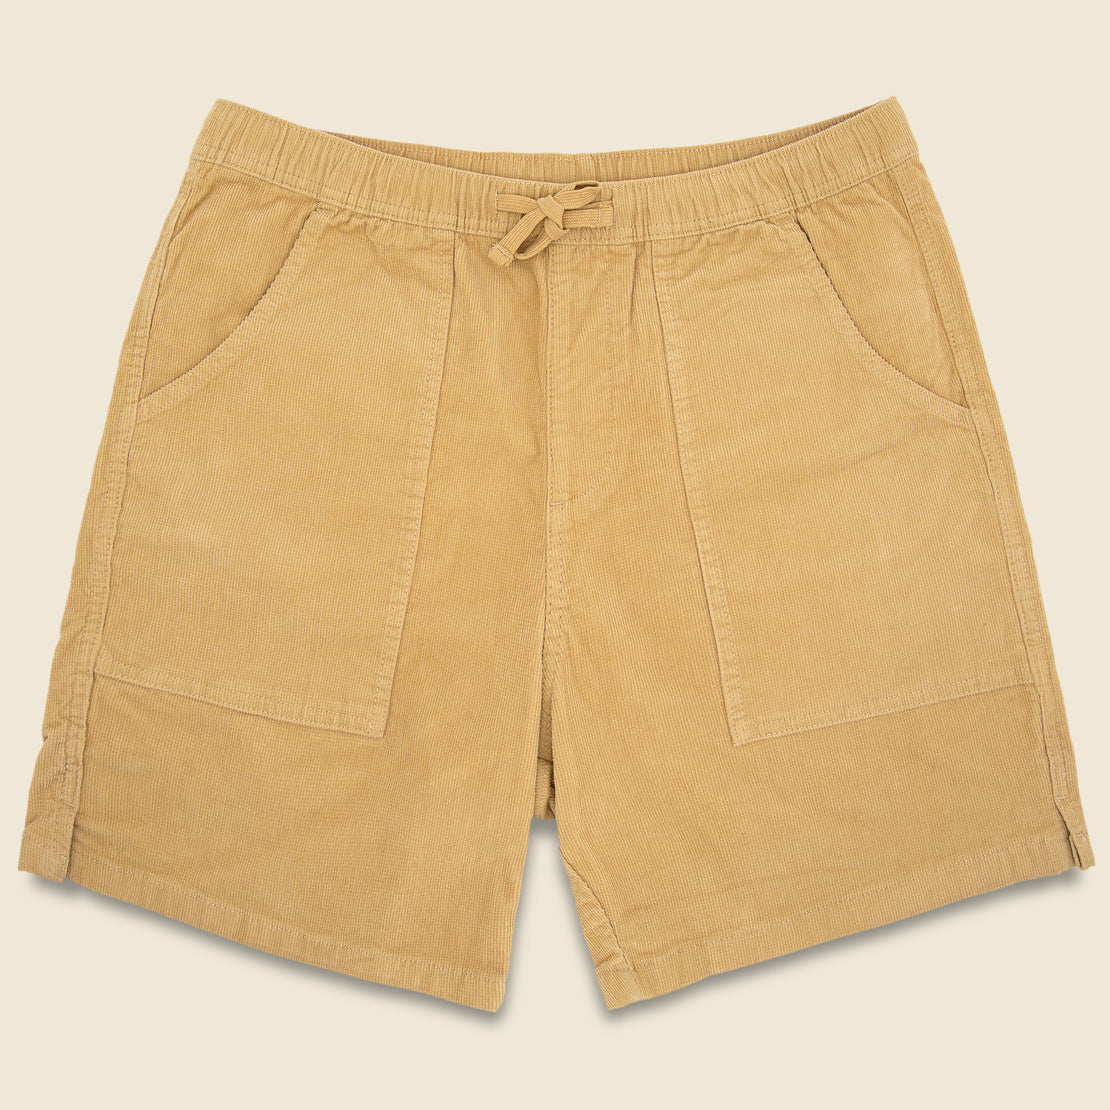 Katin Trails Cord Short - Butter